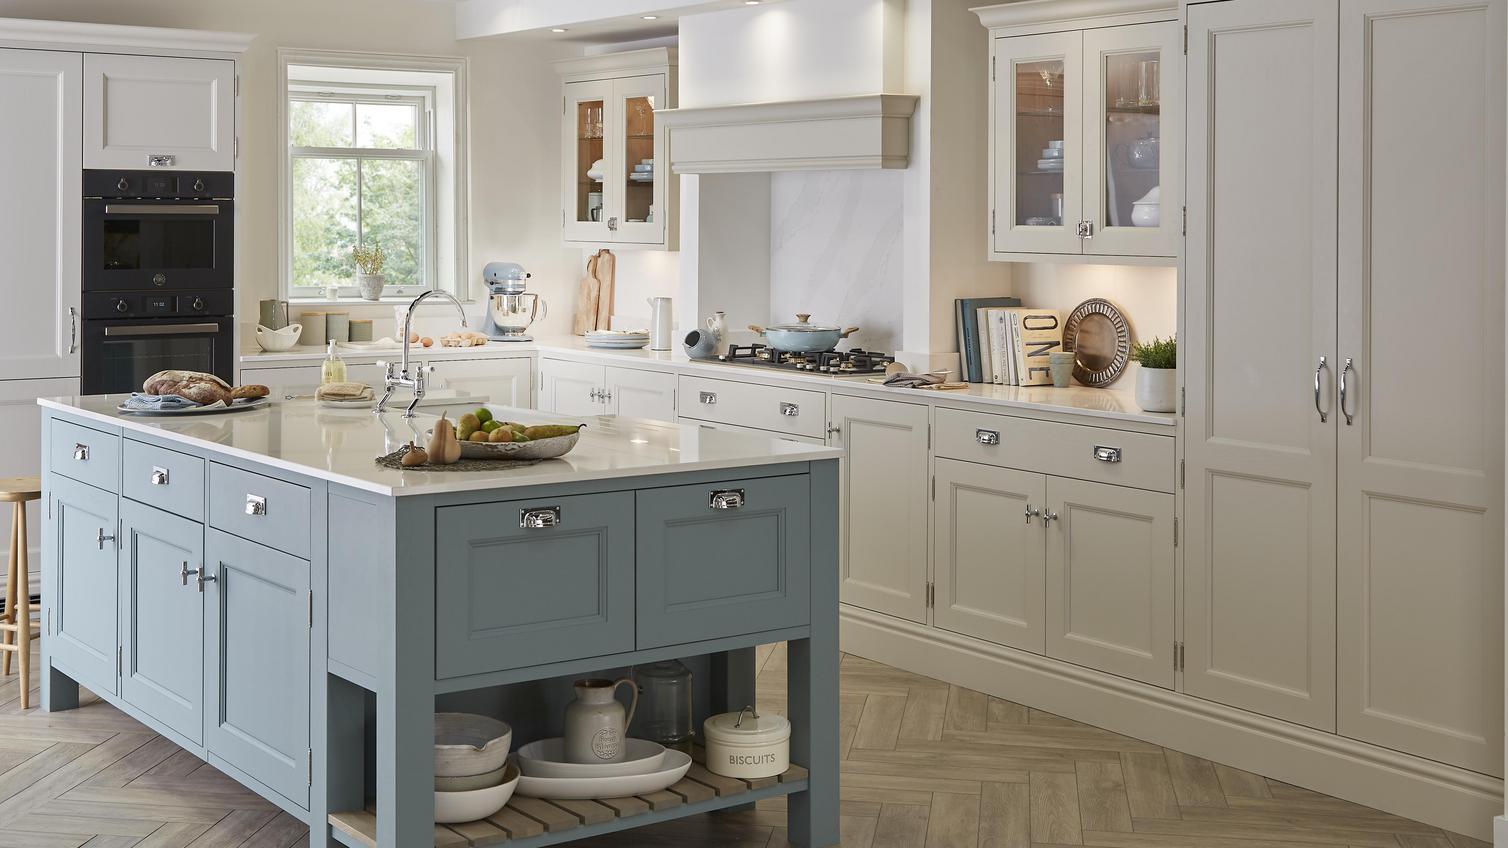 A shaker island kitchen in a large, open room, in a two tone, blue and white style